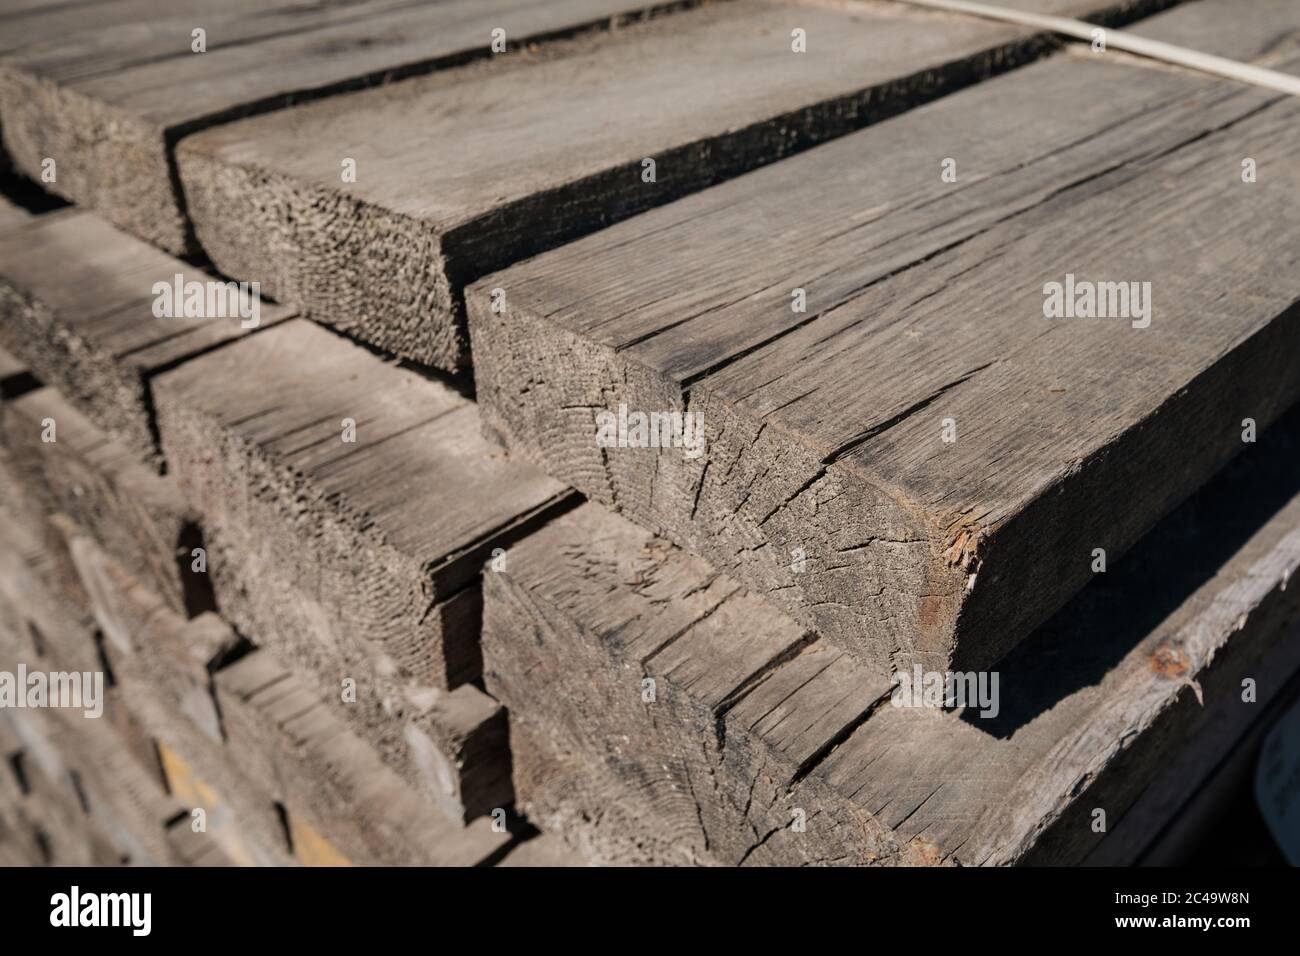 construction wood planks,wooden boards Stock Photo